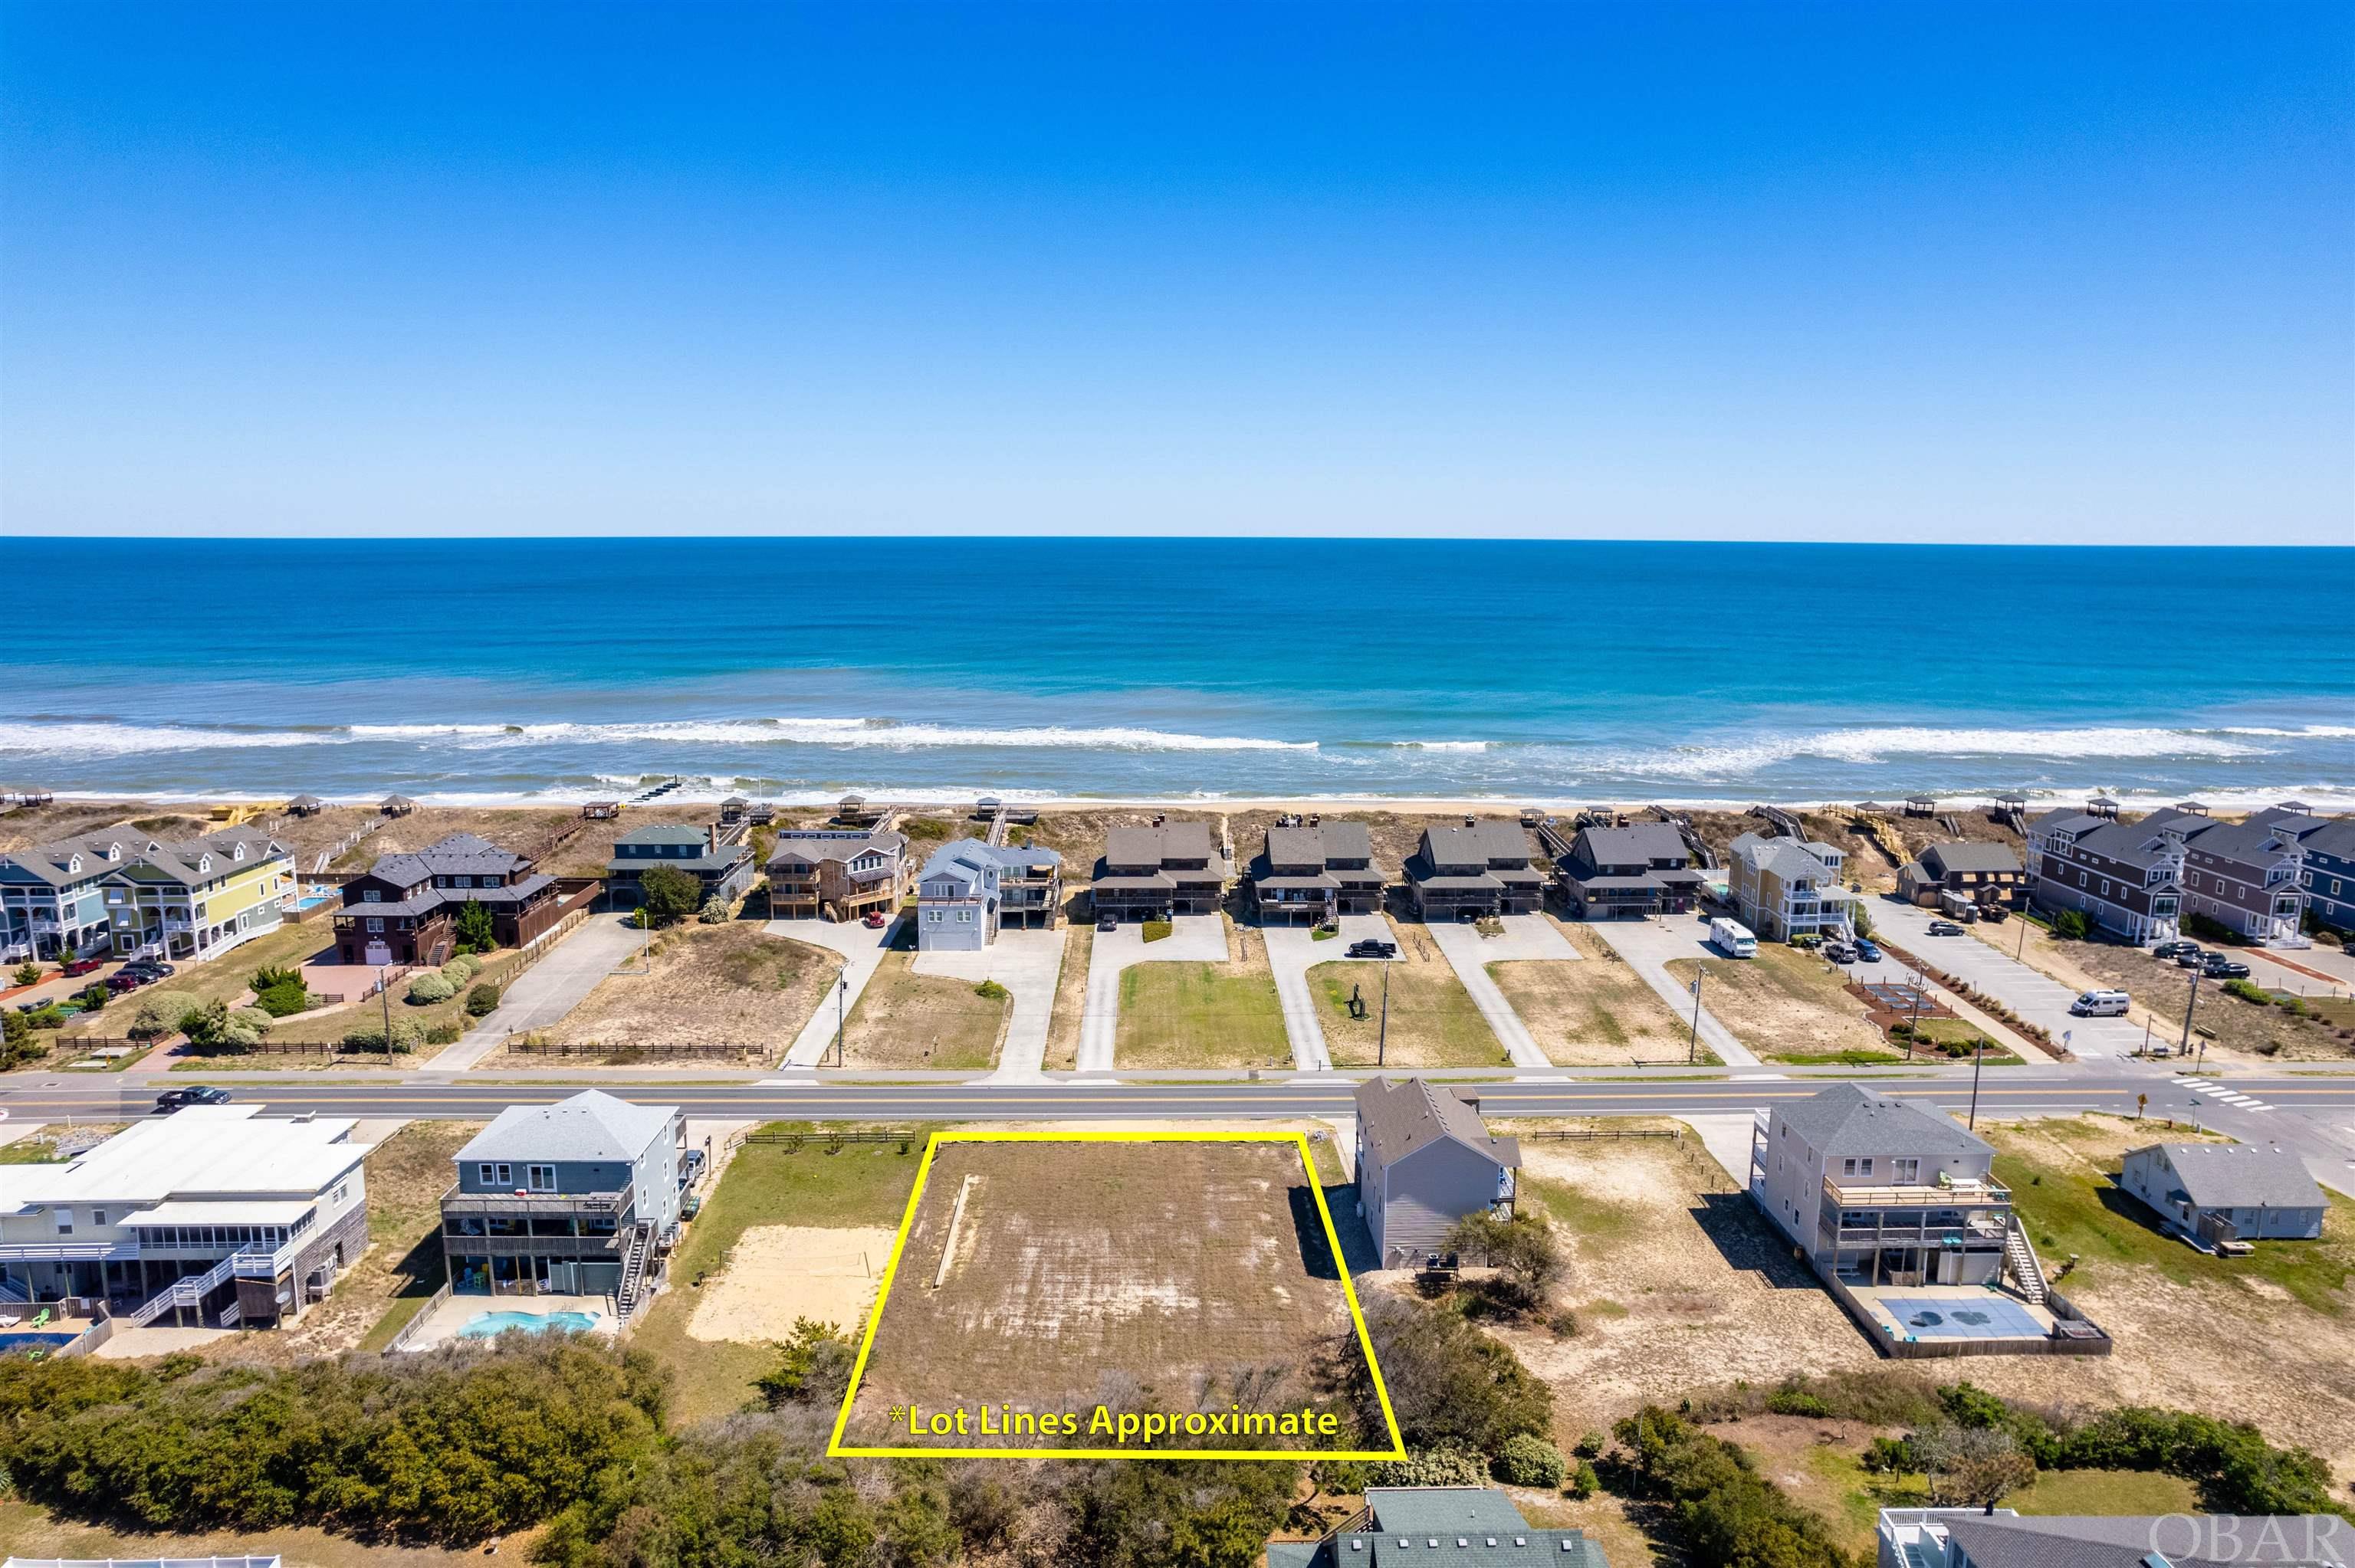 It's always a good morning when you wake up up to ocean breezes & stunning sunrises in Nags Head NC. This primo semi oceanfront location can provide that and much more with easy access to shopping, dining, Front Porch Cafe, Nags Head Pier and offers a beach access point at the locals favorite at Abalone Street, just 3 lots south. This large 15,767 sq ft X flood zone lot is 100 %ready to go. Owners had all site work, fill and house plans drawn up and approved for construction with a super unique U shaped design. Over $50,000 in fill and site work are in place making this canvas ready for your masterpiece. There is limited land left along the Outer Banks and 100 foot plus wide vacant lots are almost non existent making this an opportunity you should pounce on. House plans available separately. Invest in a lifestyle of cherished memories as each day builds your memory bank full of love. Contact us today to make your dream a reality!